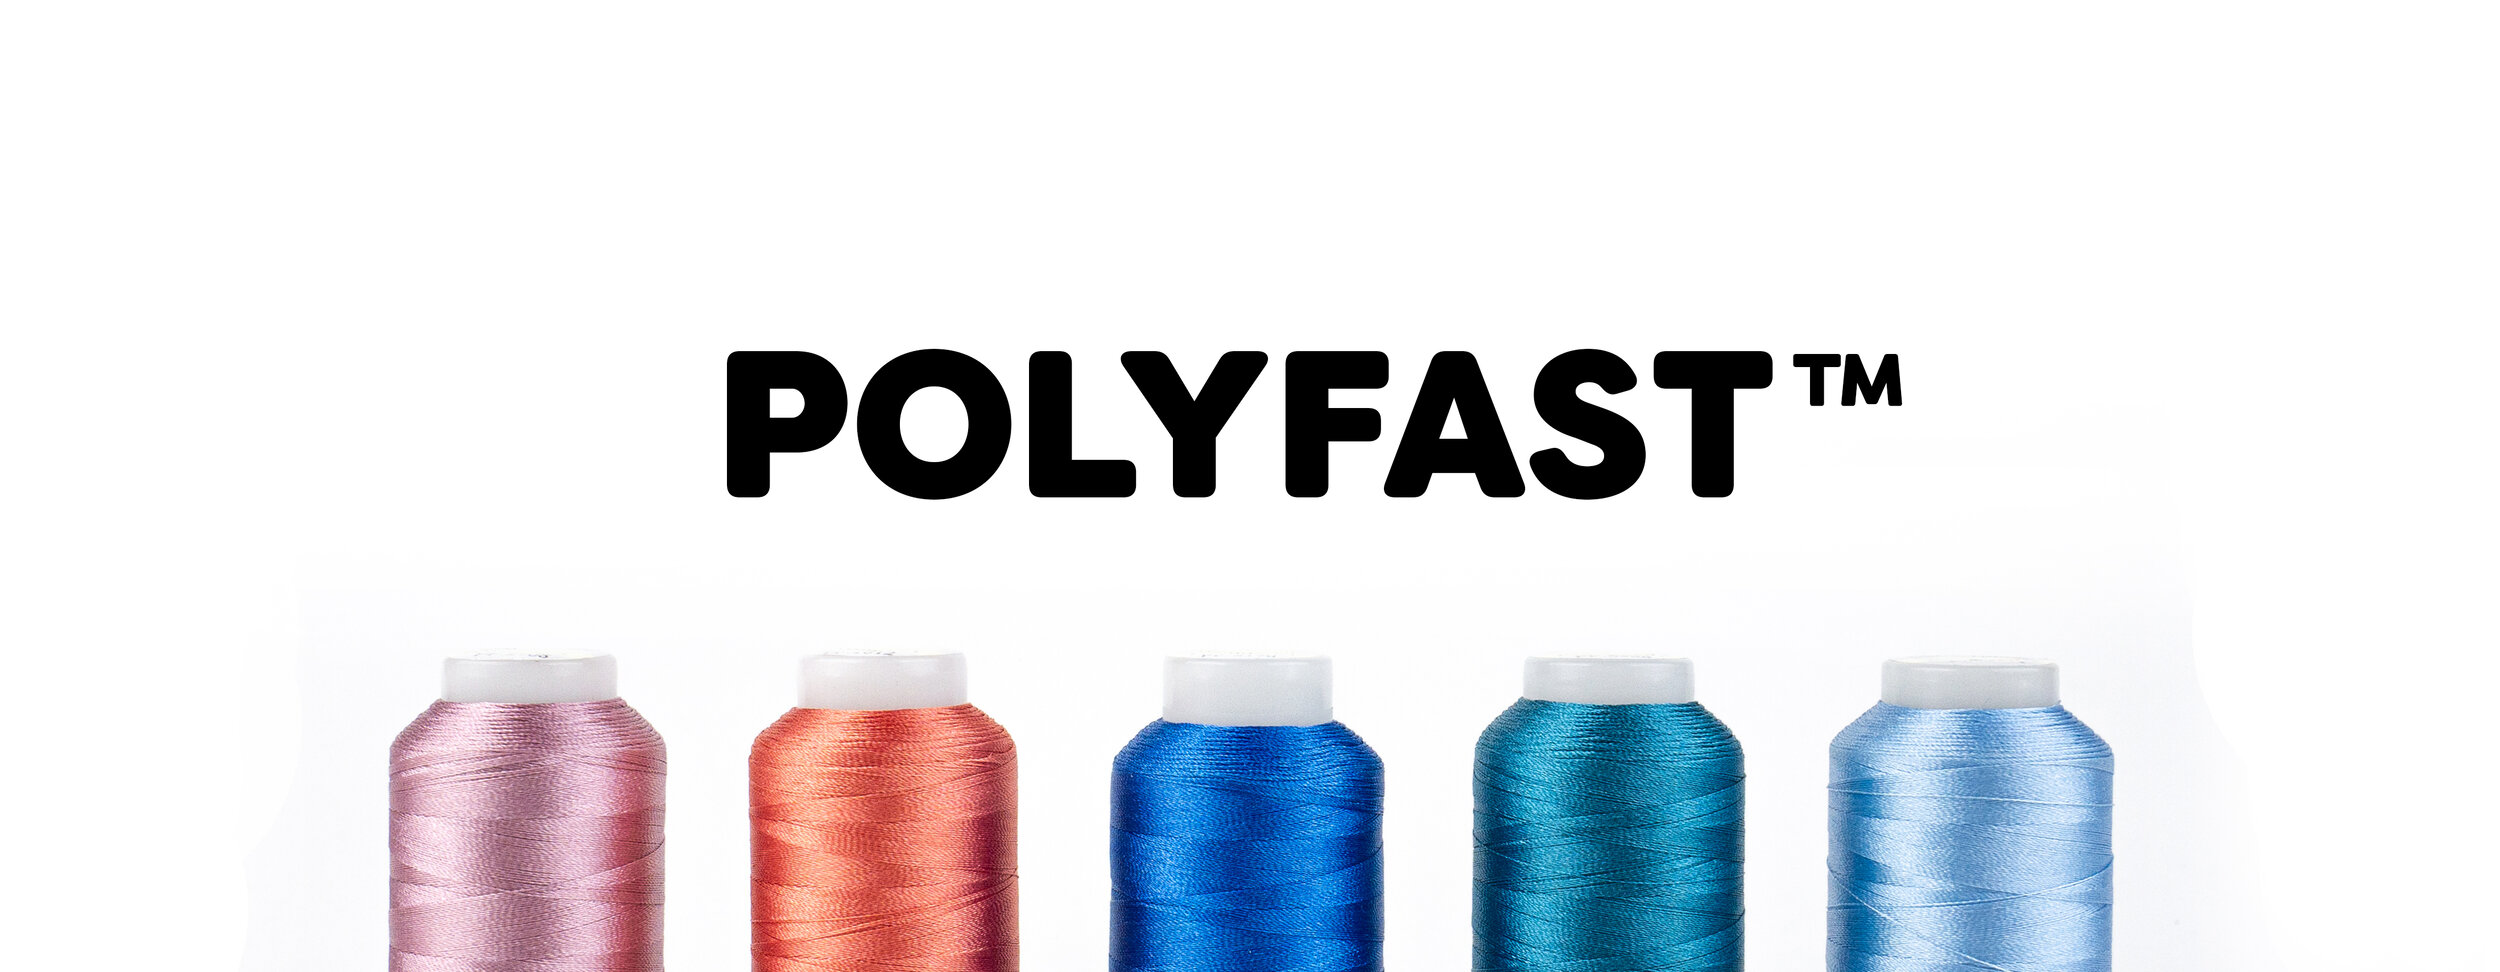 Polyfast Polyester Sewing Thread, WonderFil, 40wt, Colors 1007